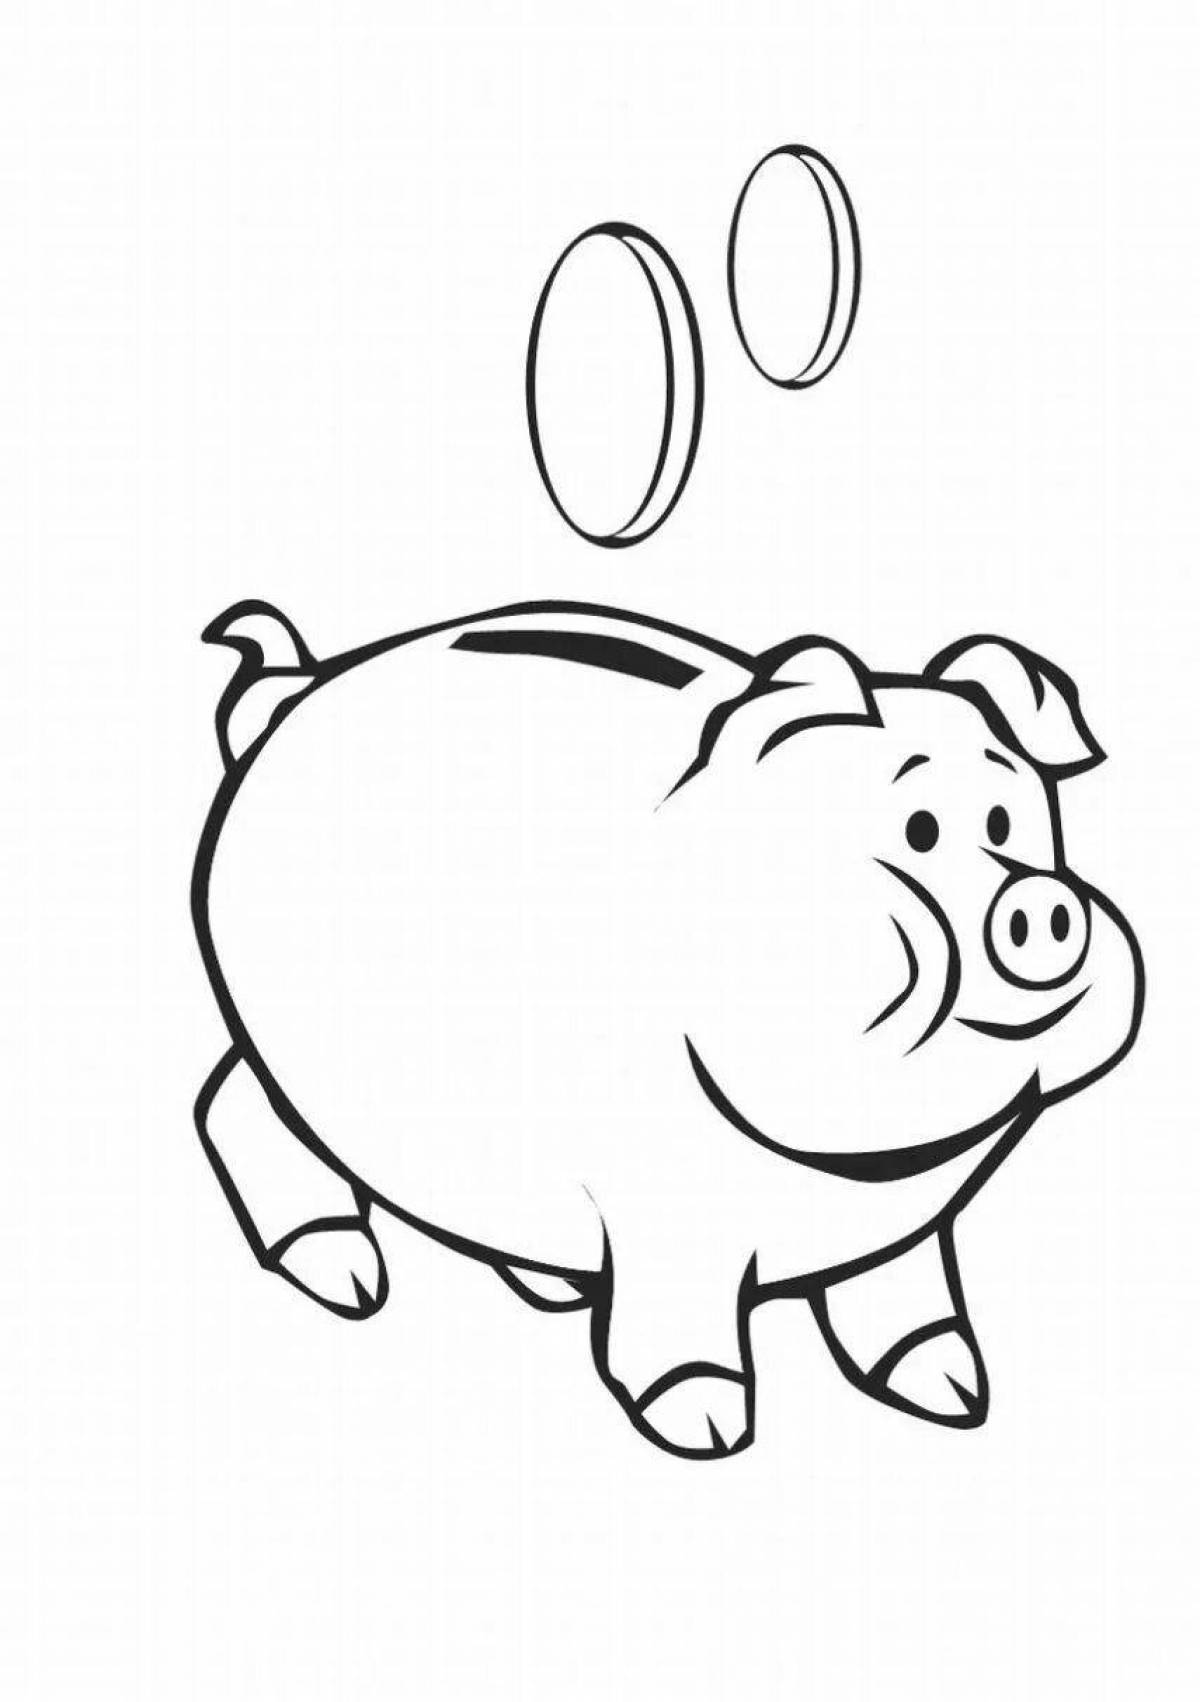 Sparkly piggy bank coloring book for kids